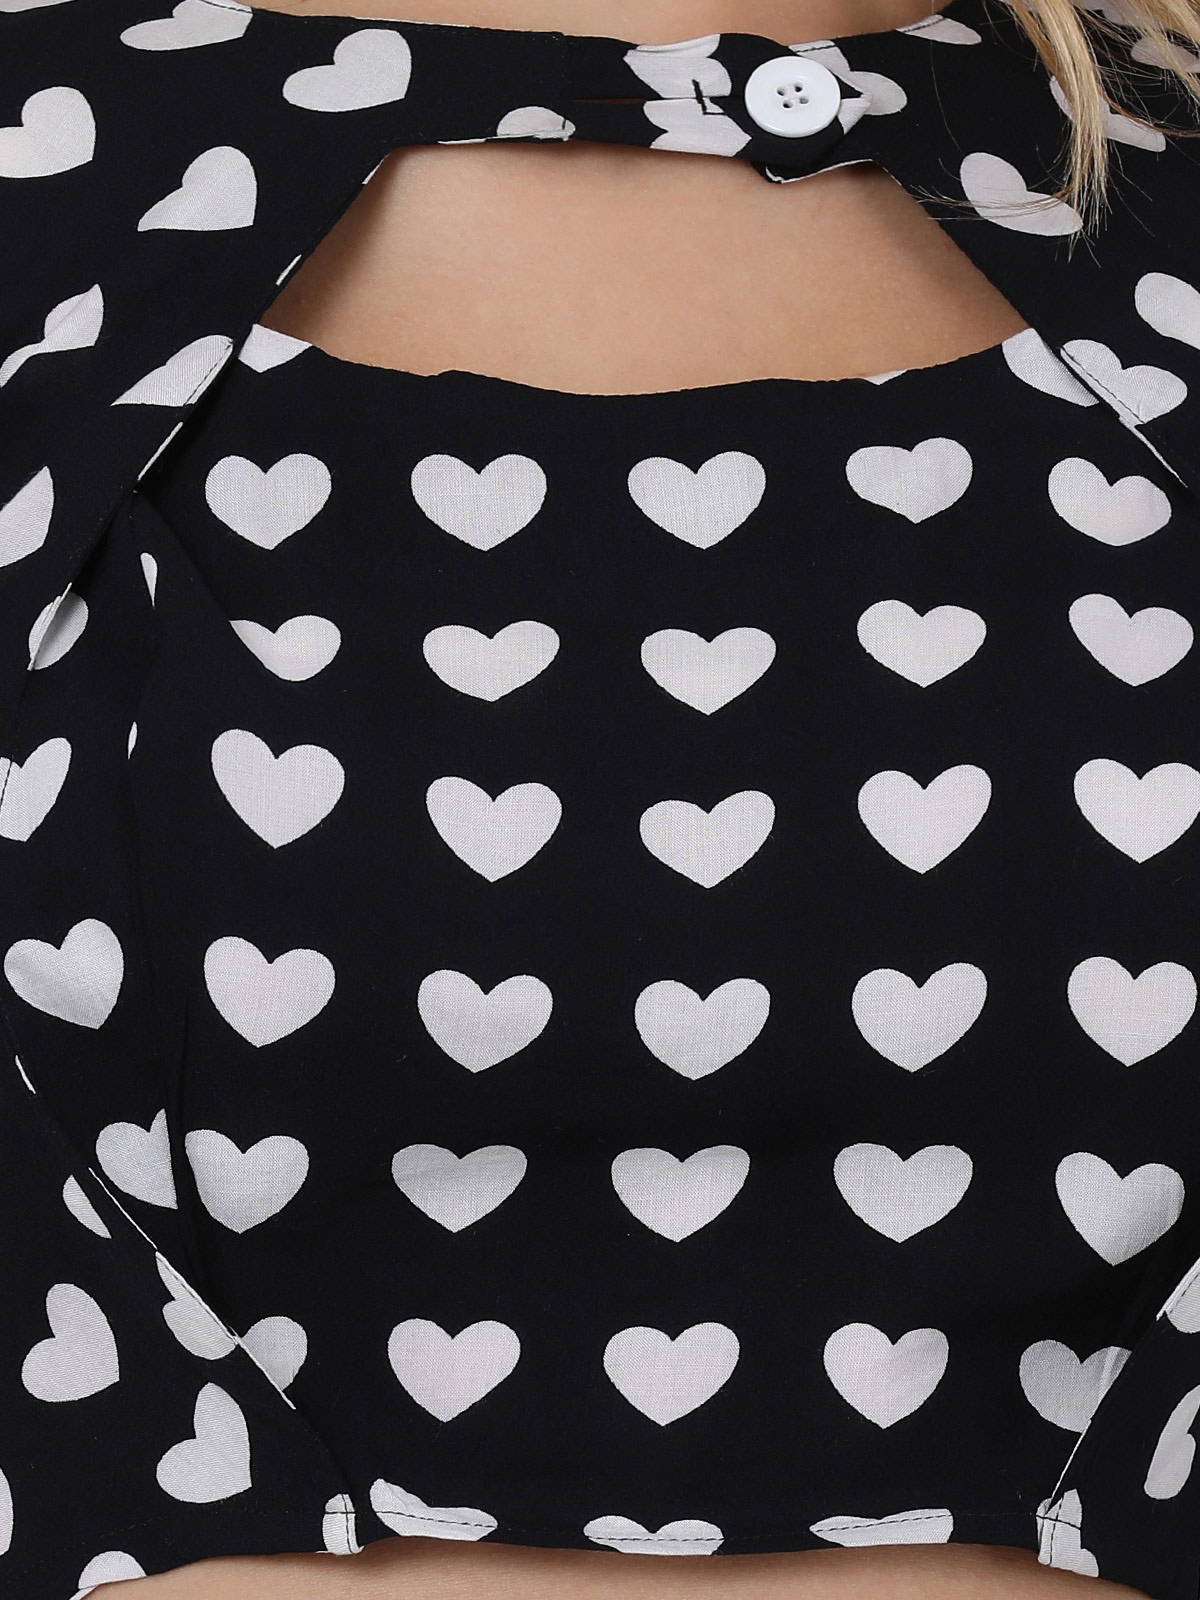 Lovely  Heart Printed Crop Top